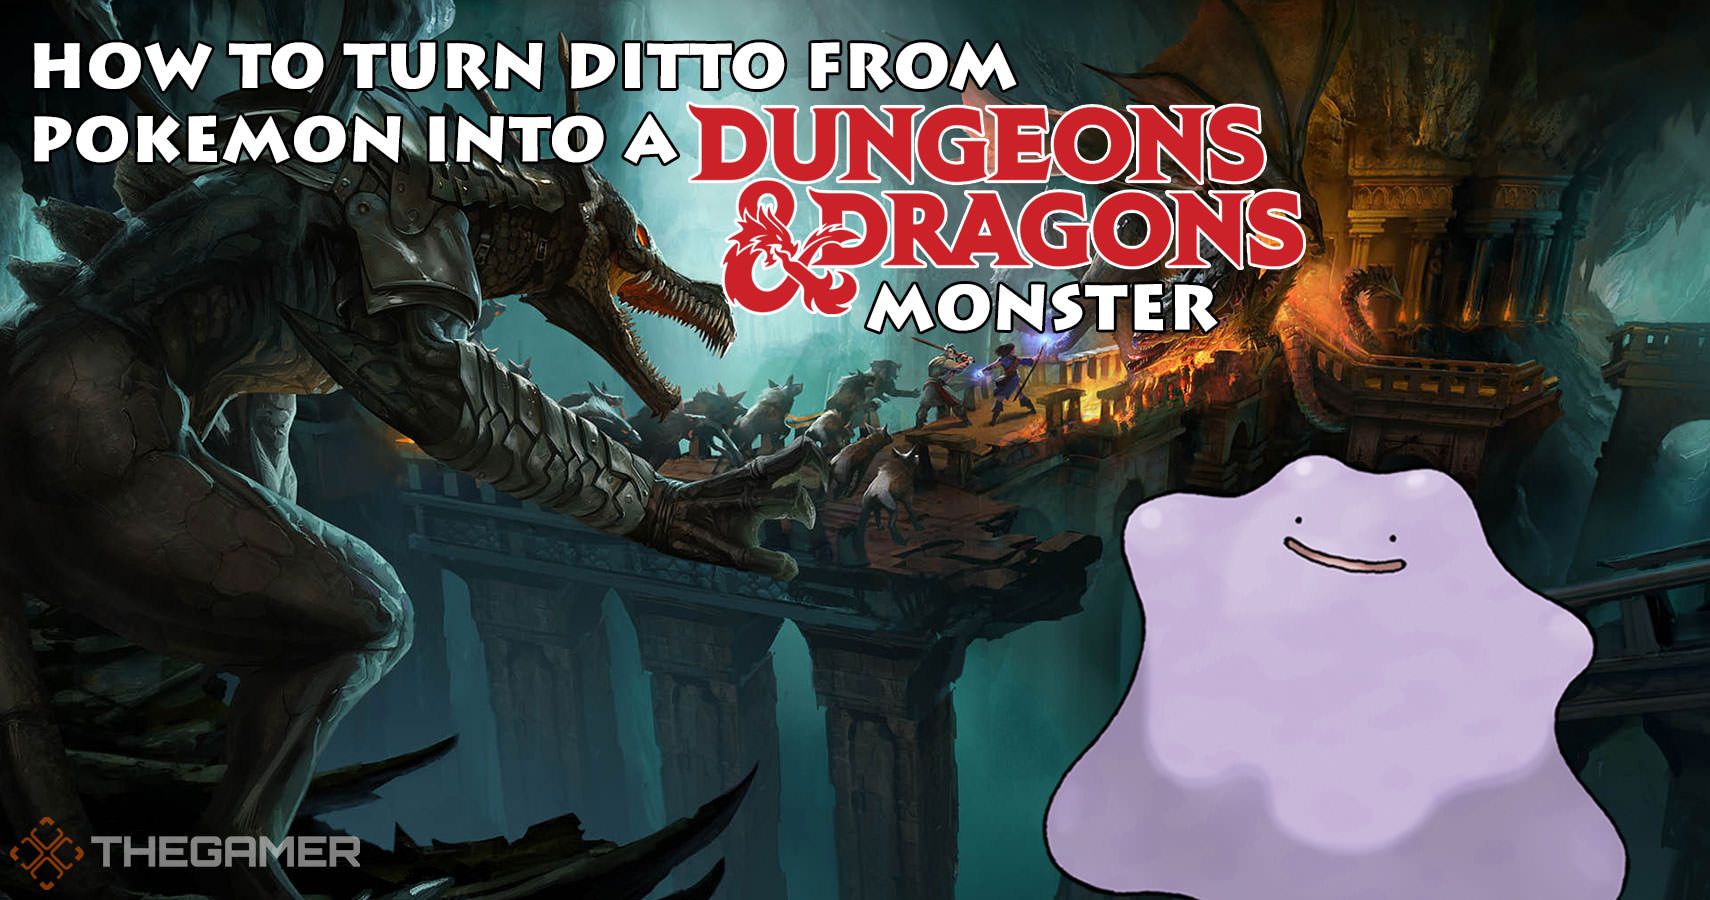 How To Turn Ditto From Pokemon Into A D&D Monster